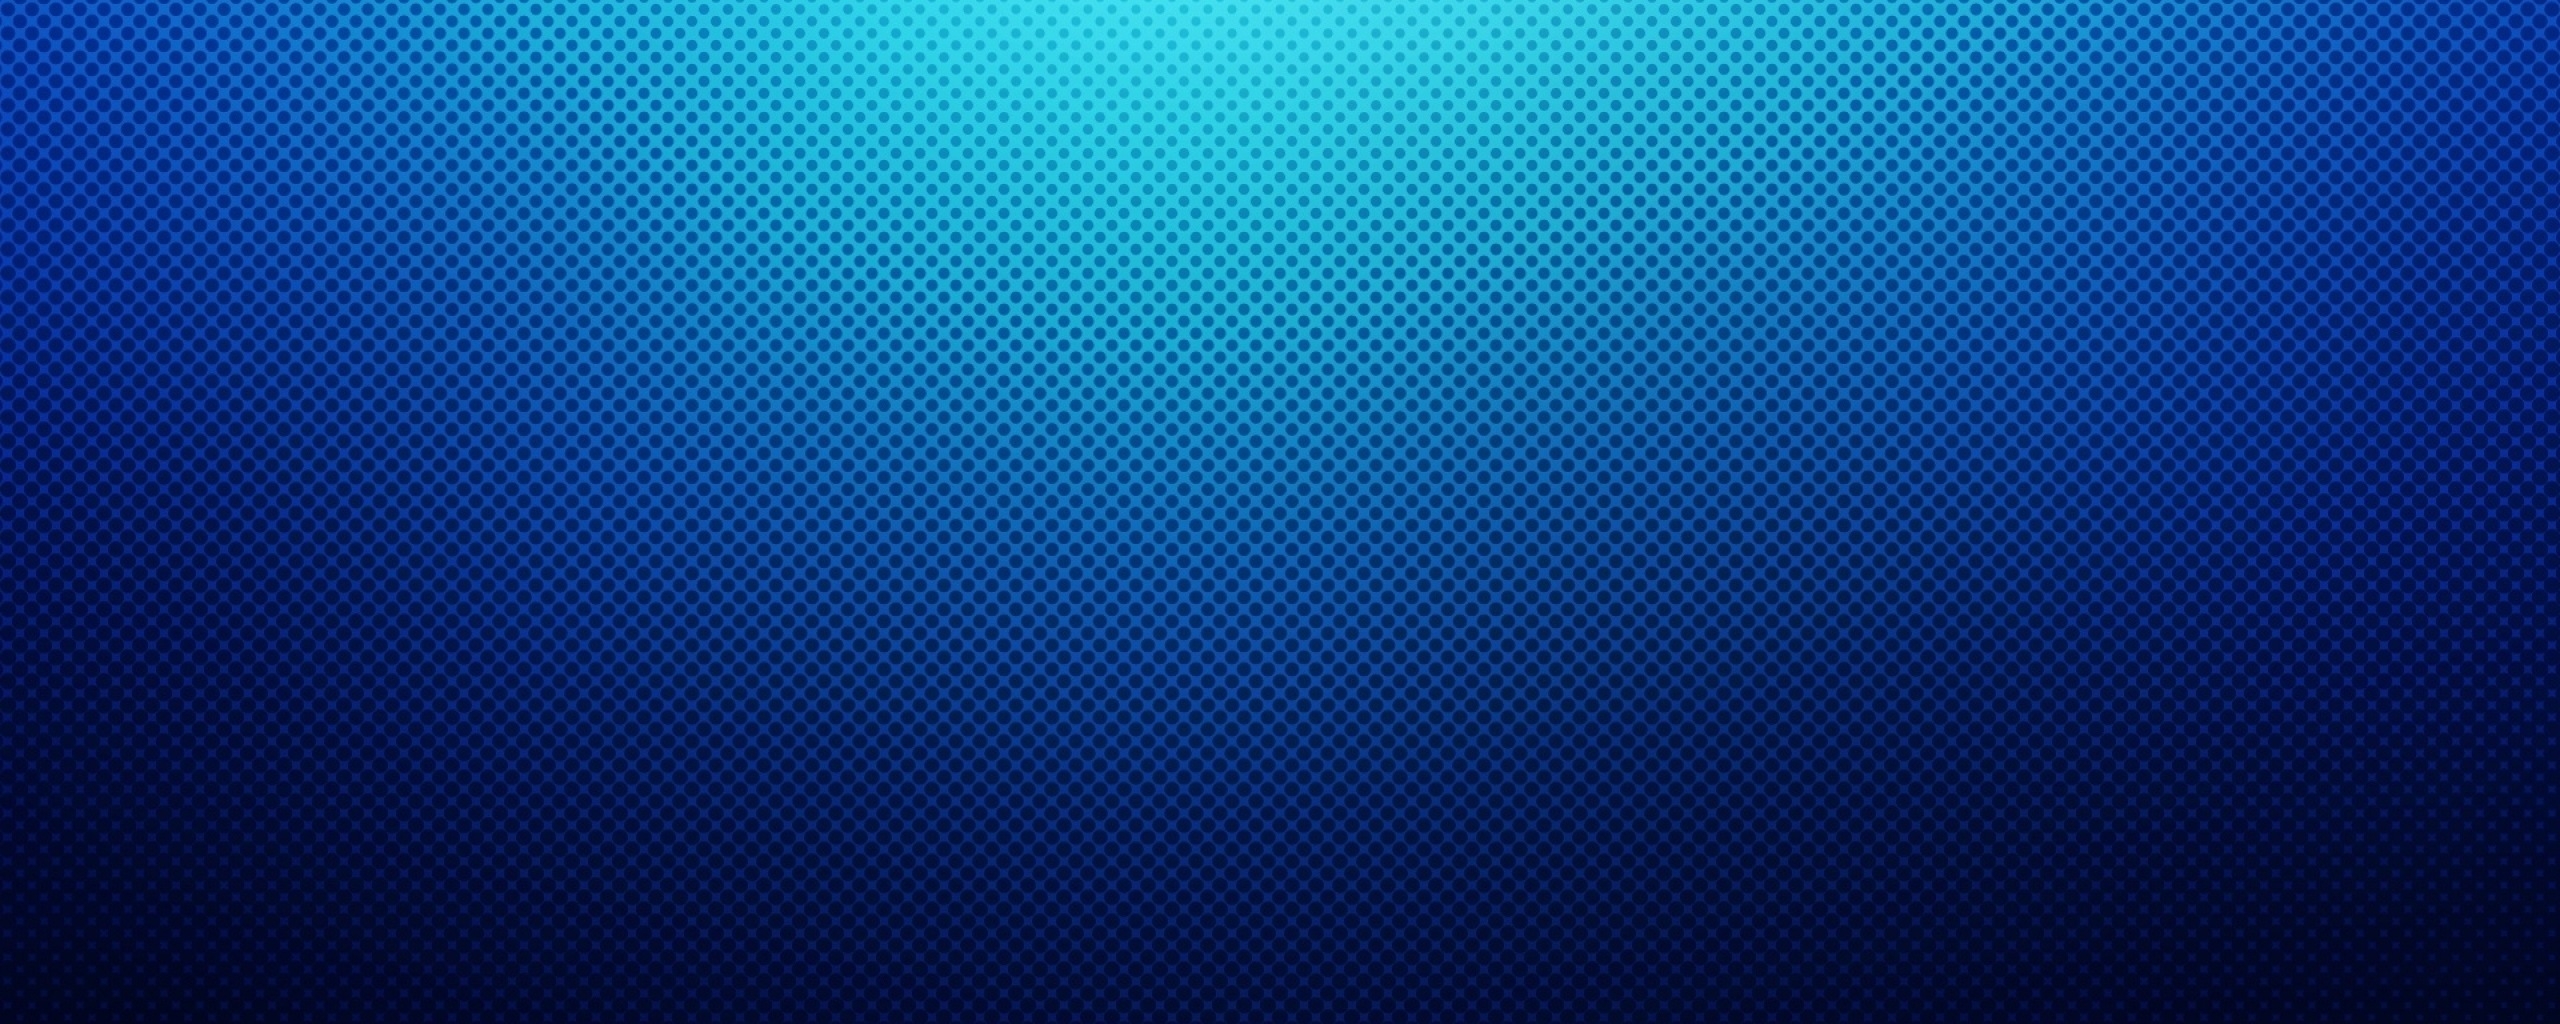 Blue Cool Banner Backgrounds For Powerpoint Templates Ppt Backgrounds Youtube banners green screen | free chroma key. blue cool banner backgrounds for